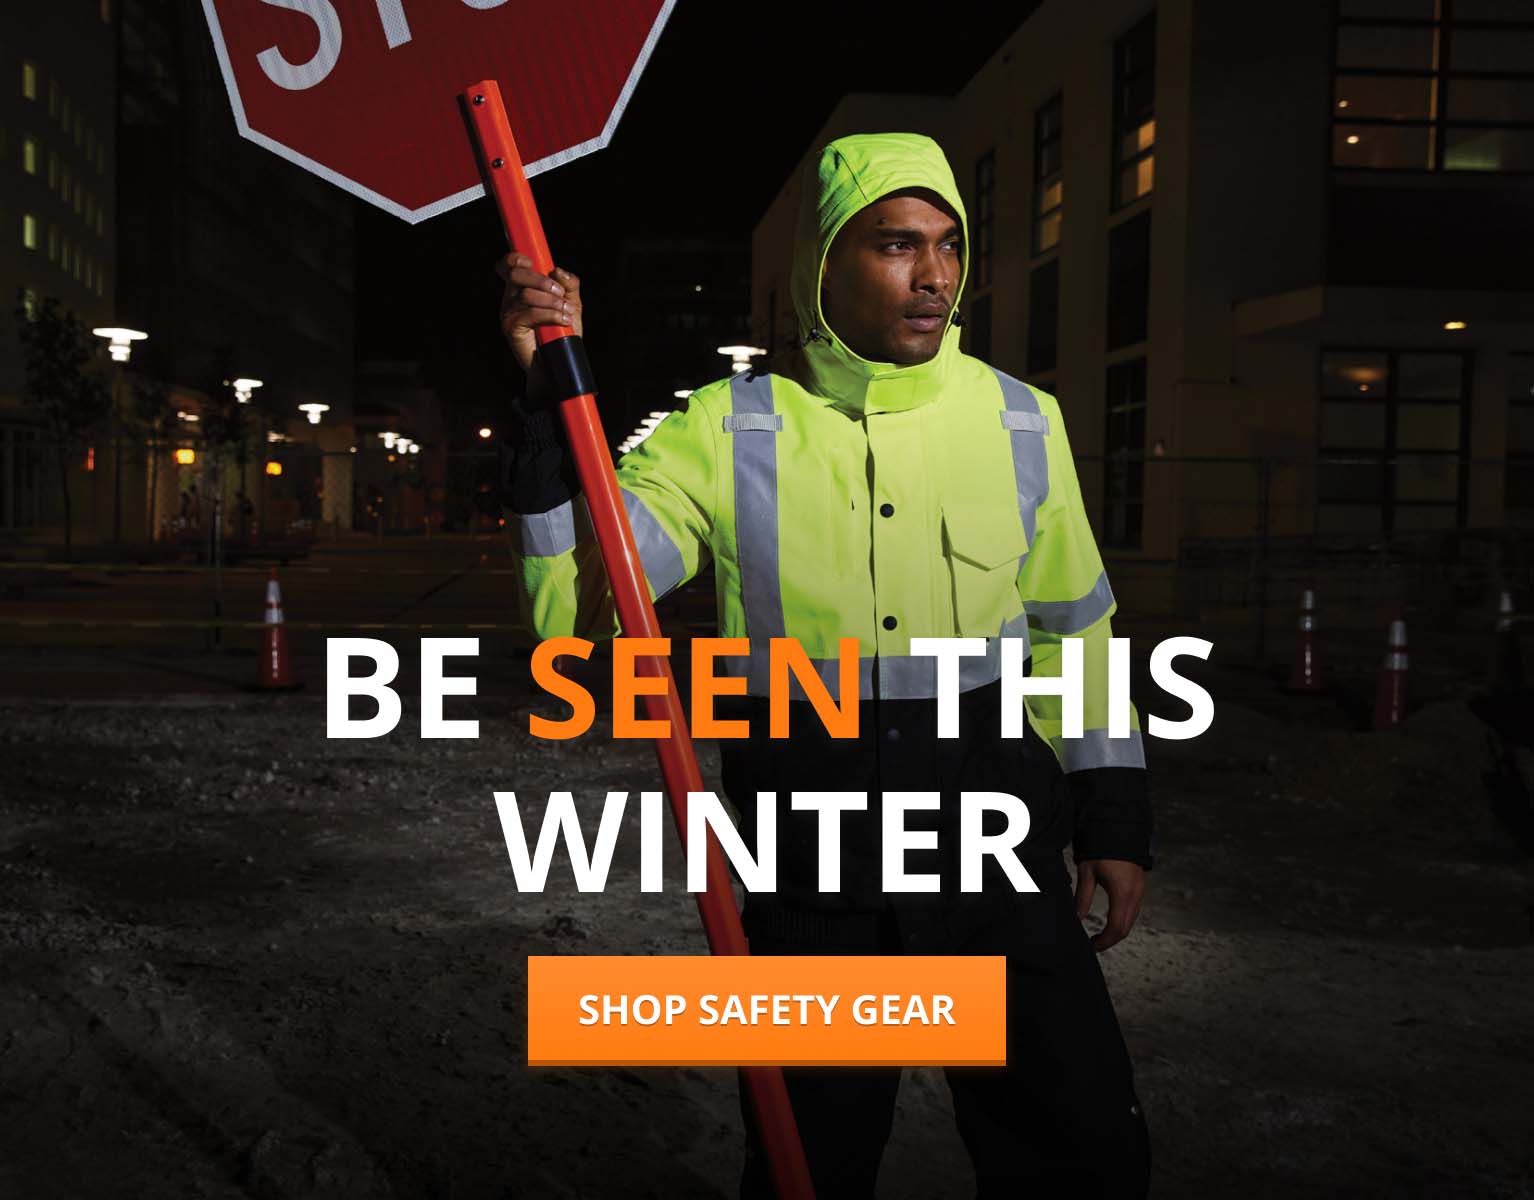 Be Seen this Winter